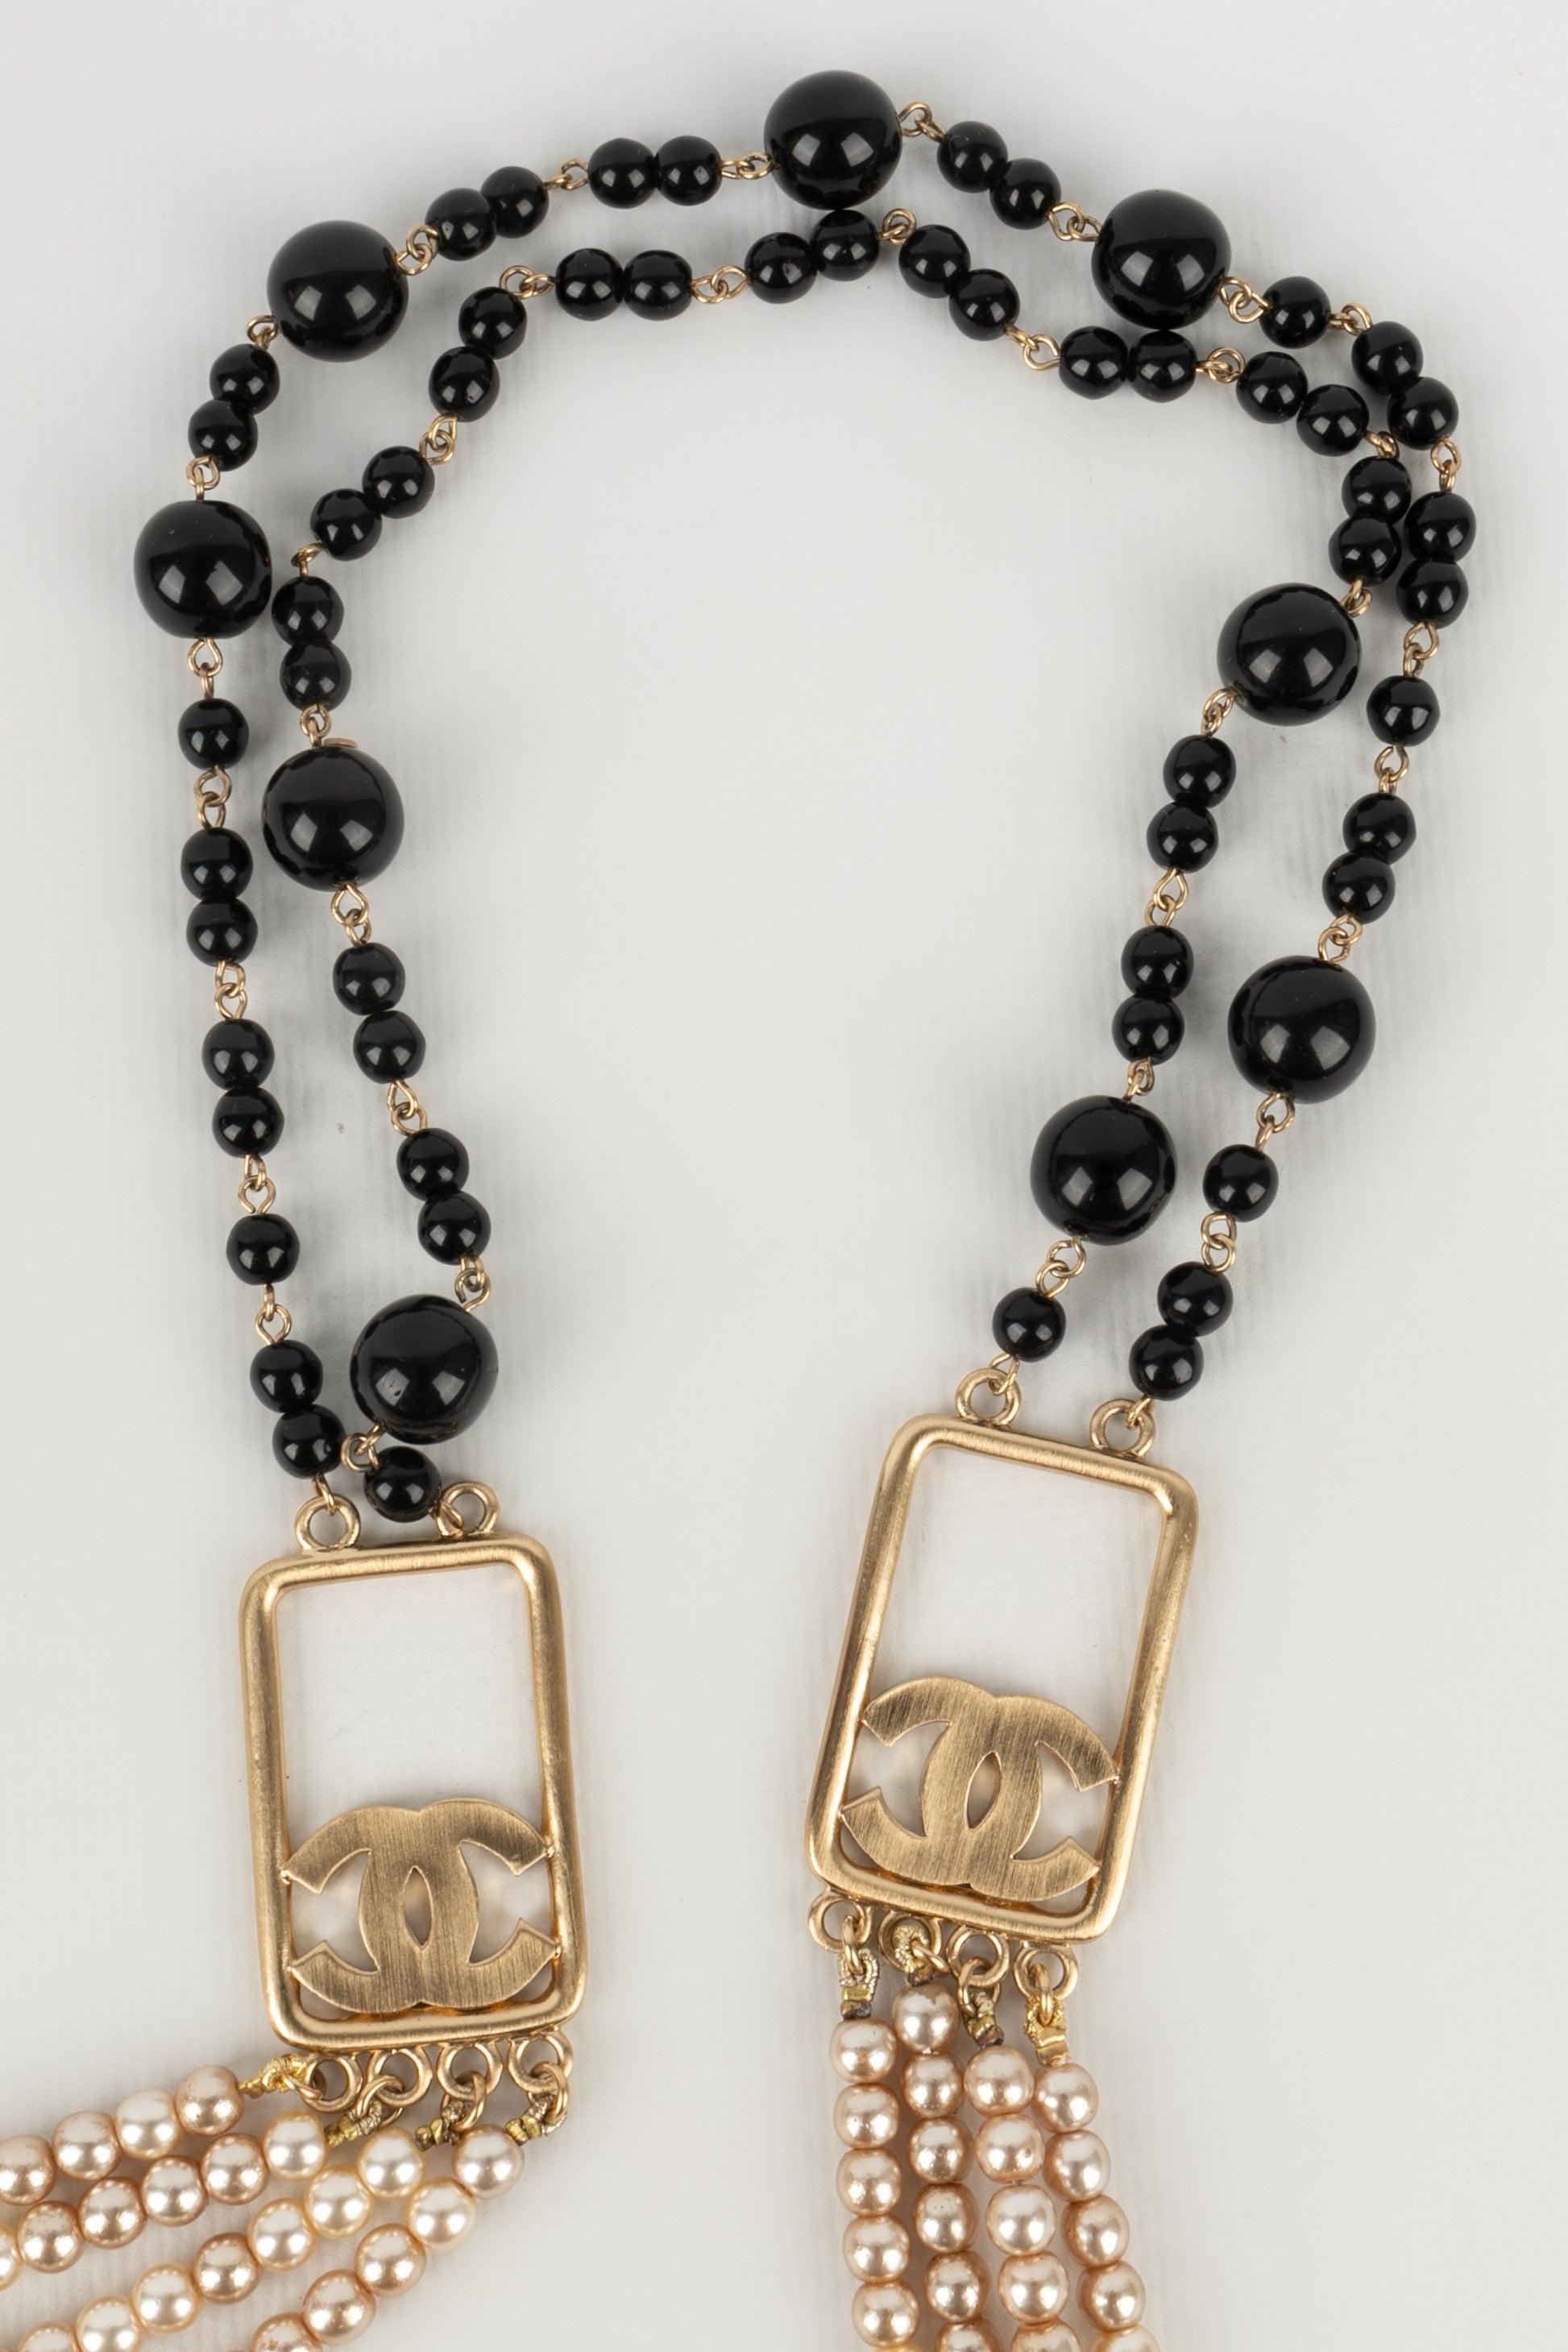 Women's Chanel Long Necklace with Costume Pearls and Black Glass Pearls, 2003